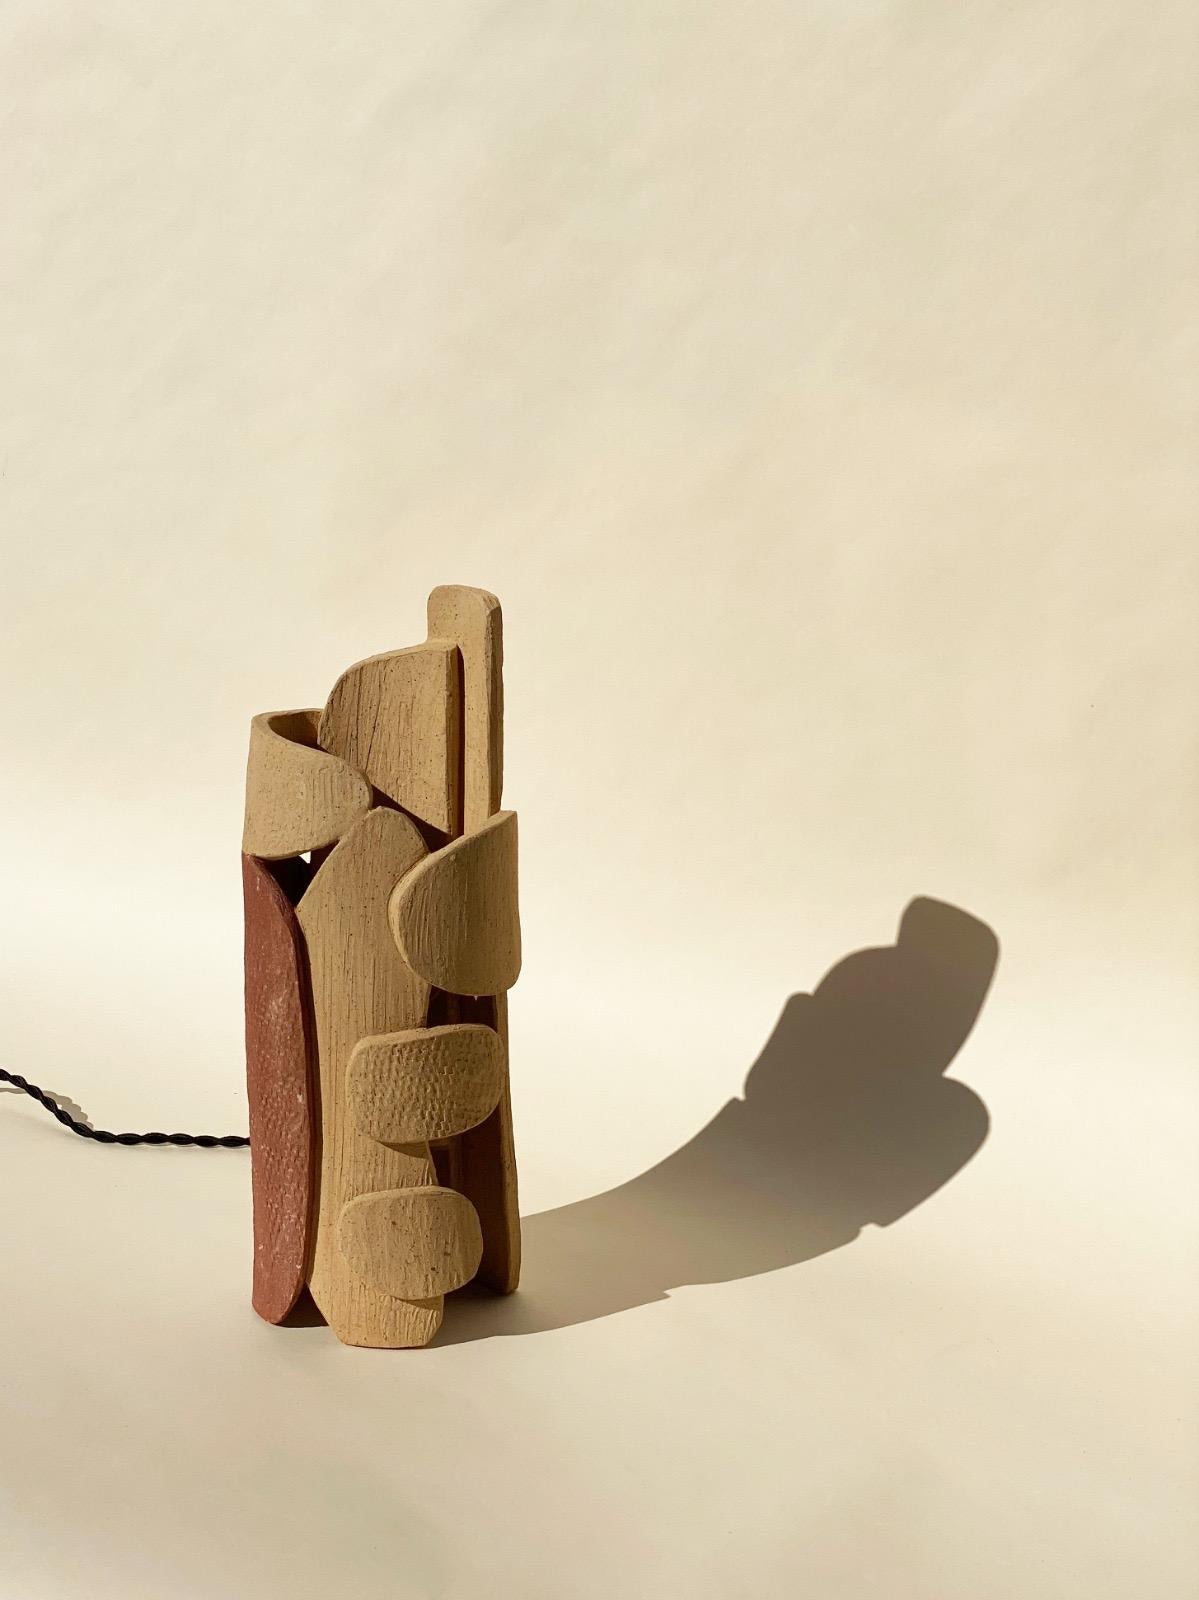 Contemporary Terra Cotta Lamp by Olivia Cognet